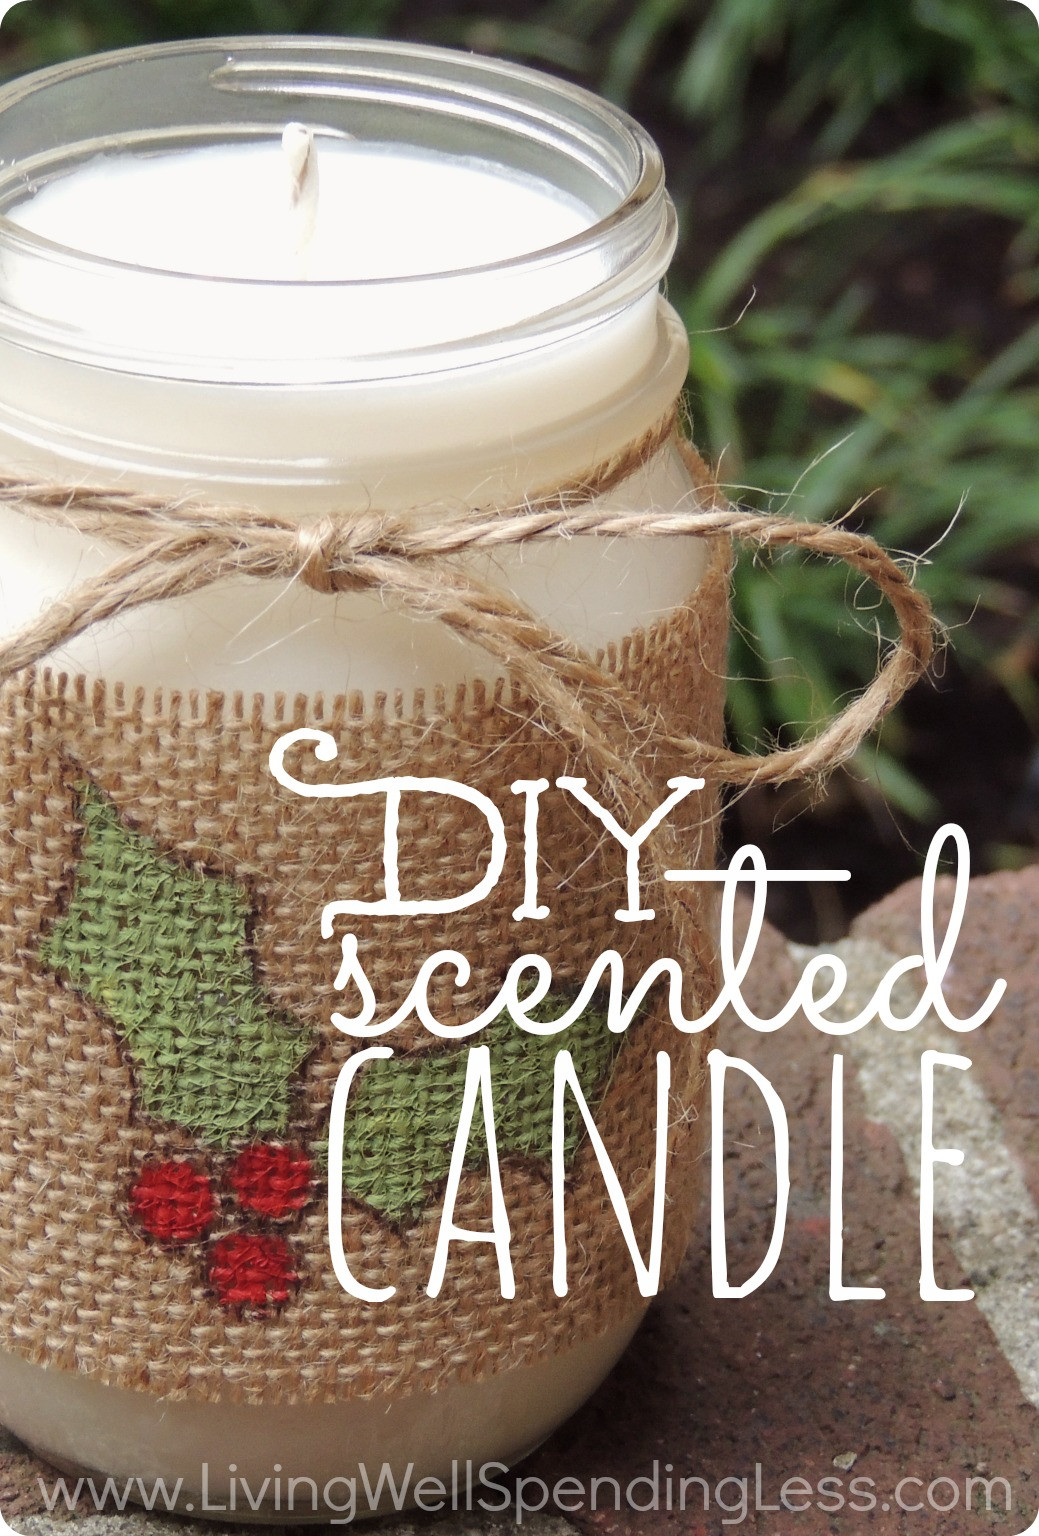 DIY Jar Gifts
 DIY Scented Candle Handmade Gifts Ideas